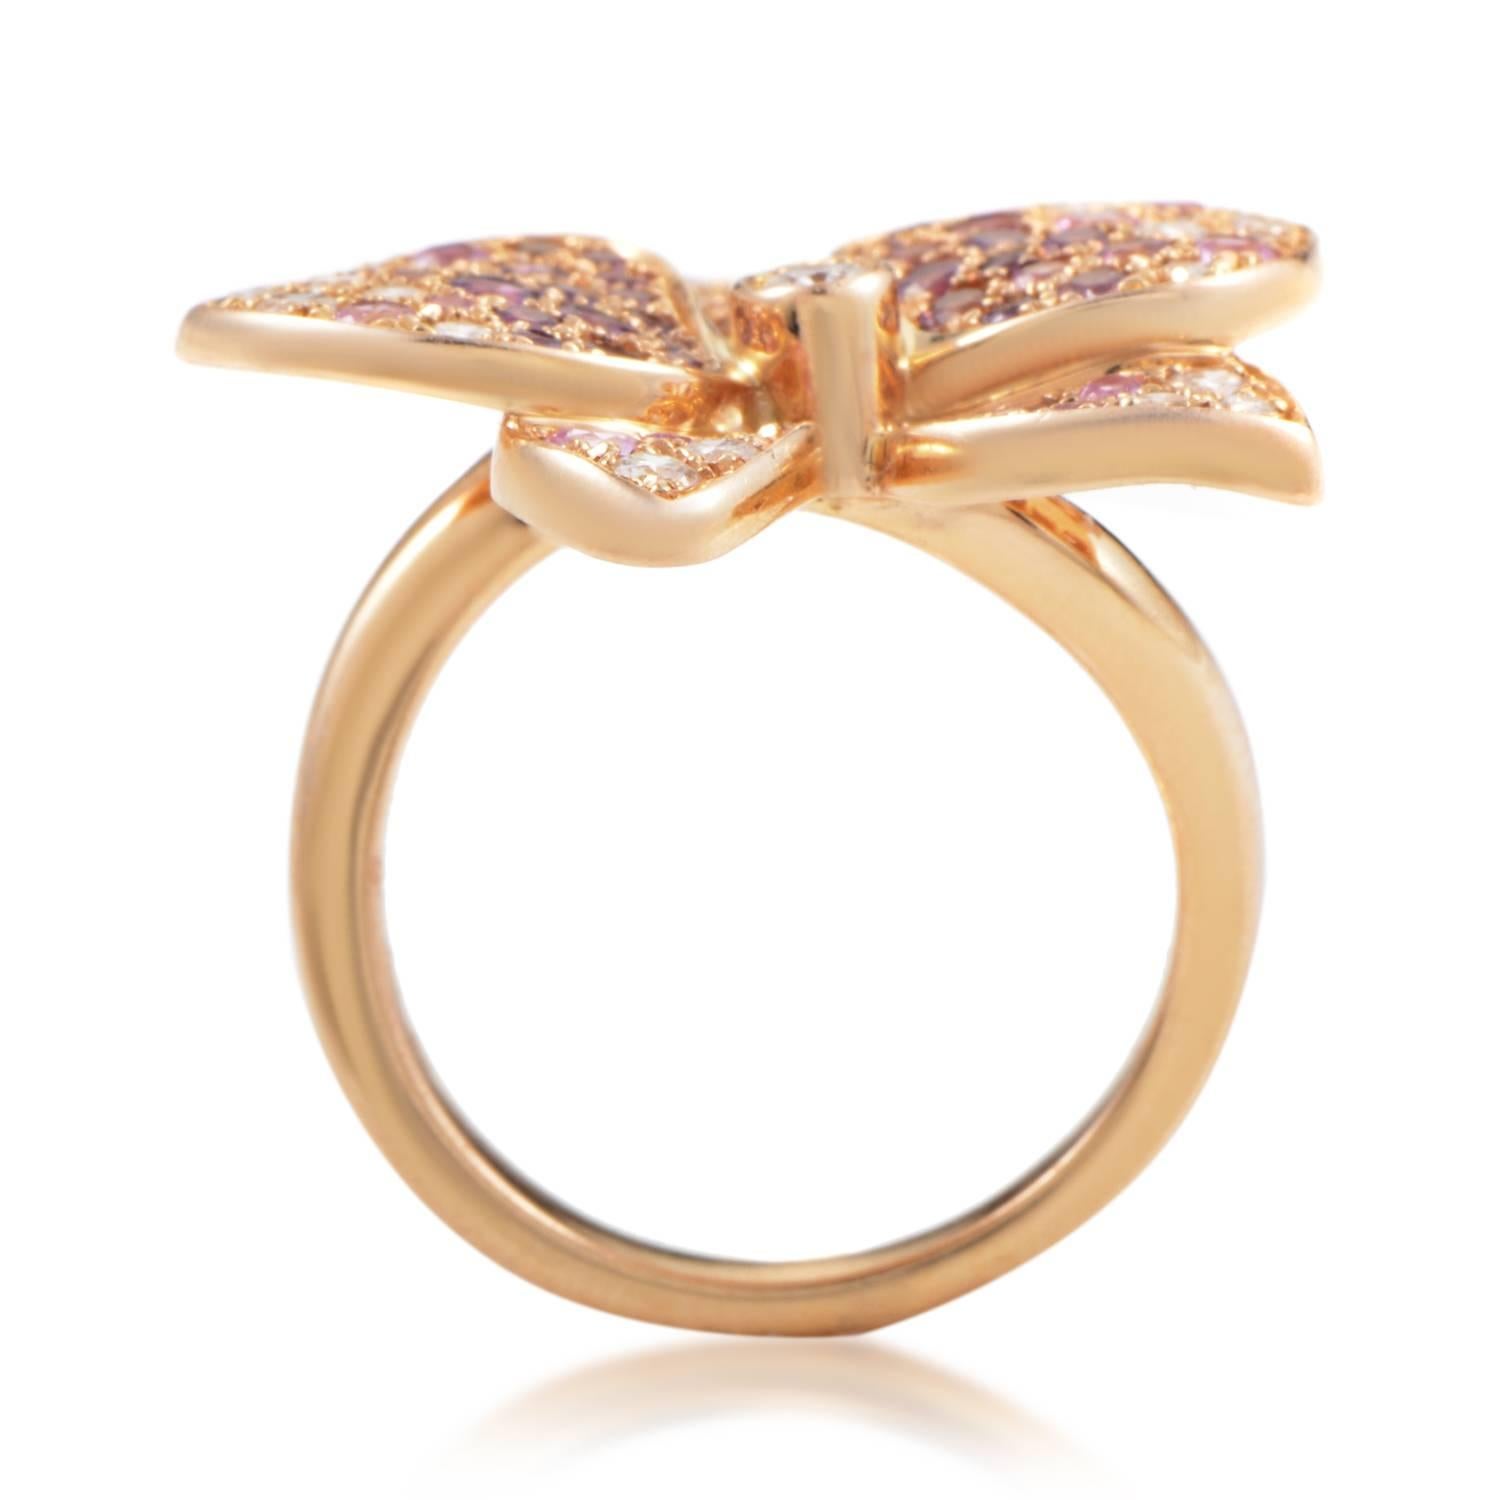 The finest precious metals and Cartier craftsmanship have immortalized the delicate beauty of the orchid in this stunning ring. 18K rose gold has been lovingly melded into blossoming petals that are a gleaming base for pink sapphires, rhodolite